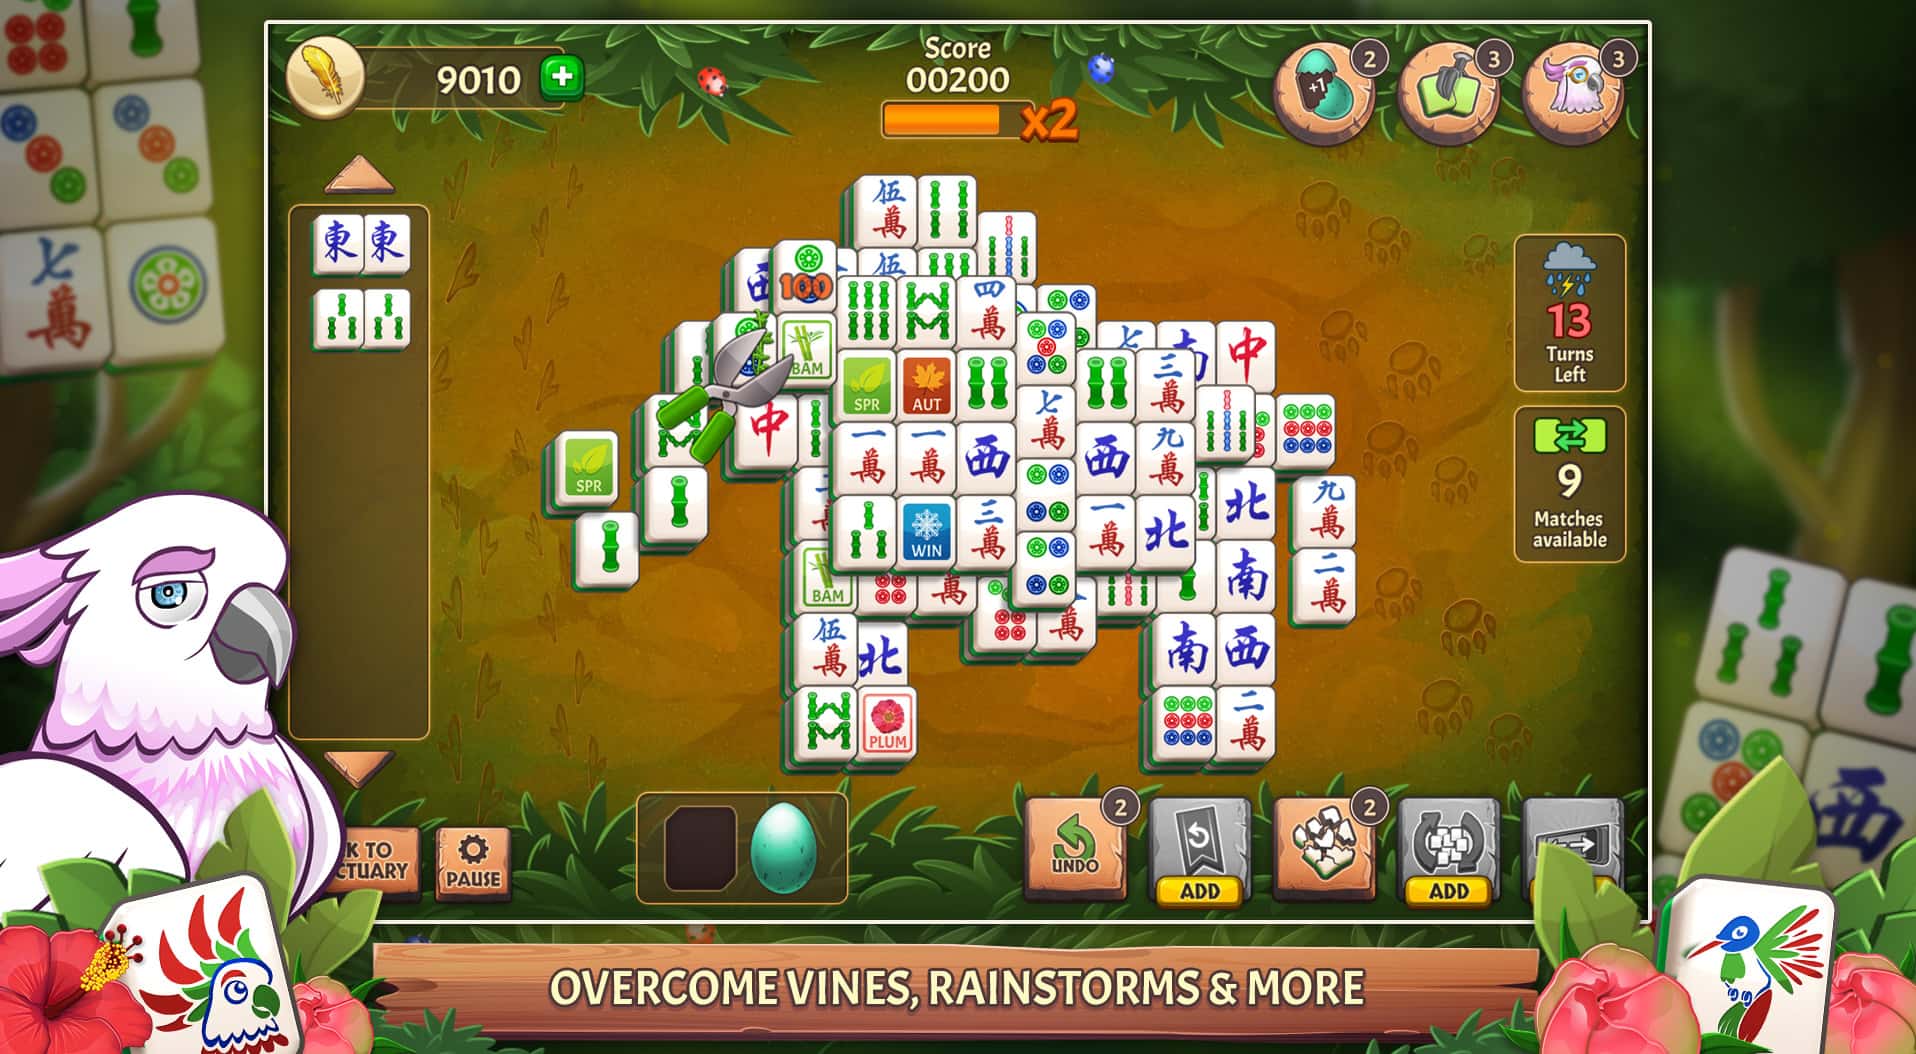 Play Mahjong, 100% Free Online Game